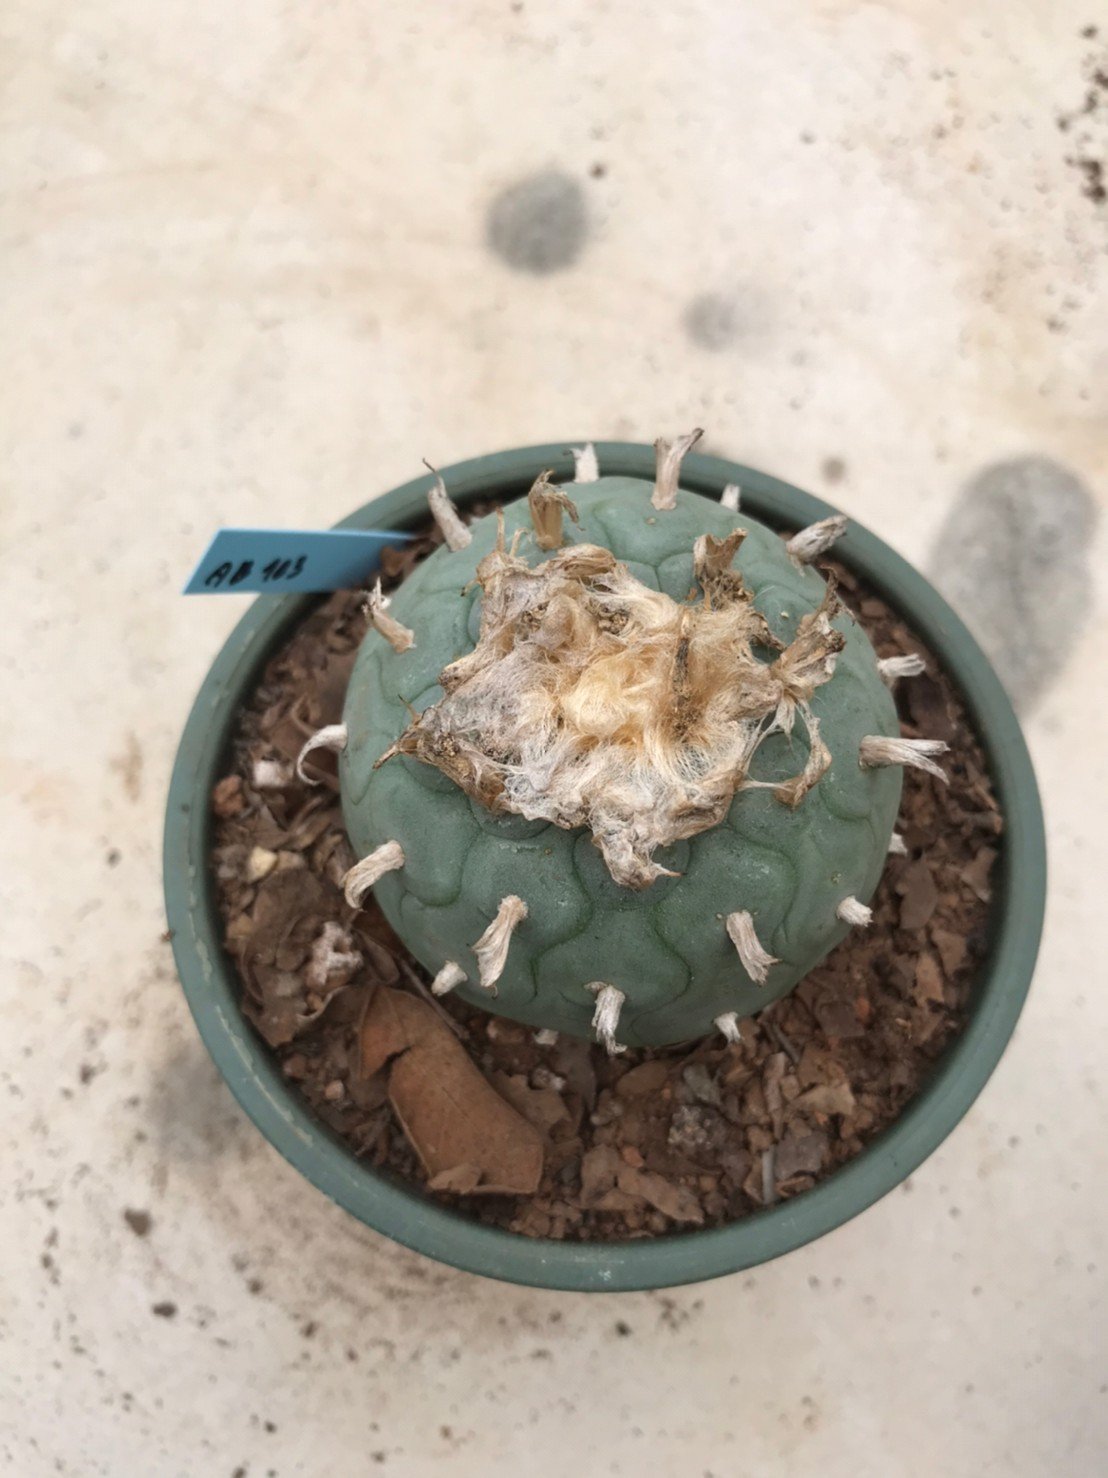 Lophophora fricii grow from seed 25 years old - can give flower and seed